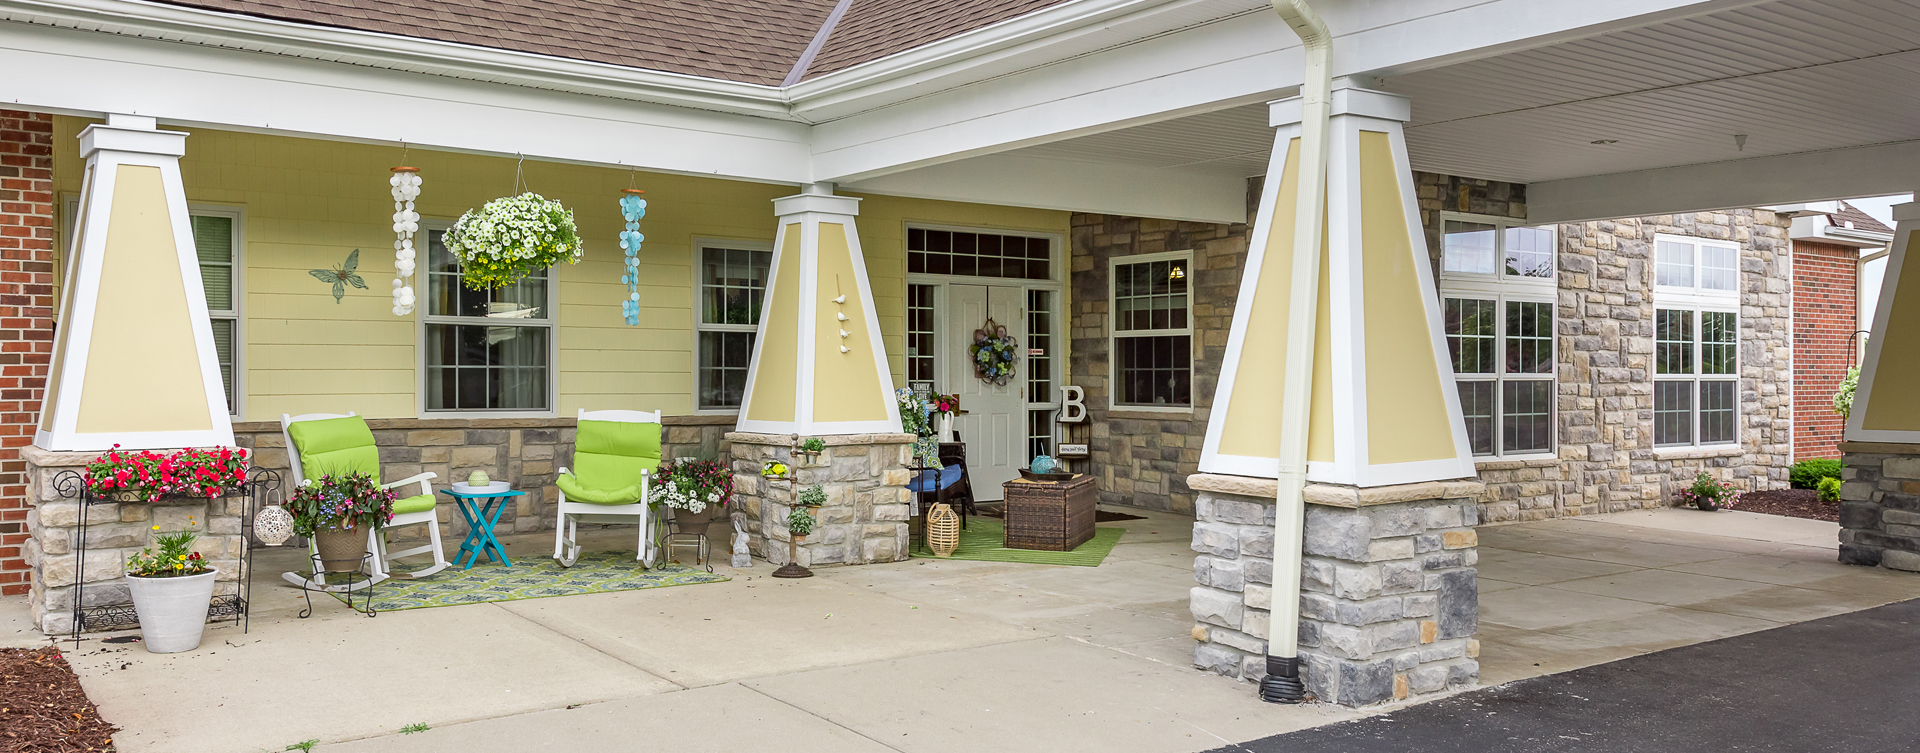 Enjoy conversations with friends on the porch at Bickford of Saginaw Township